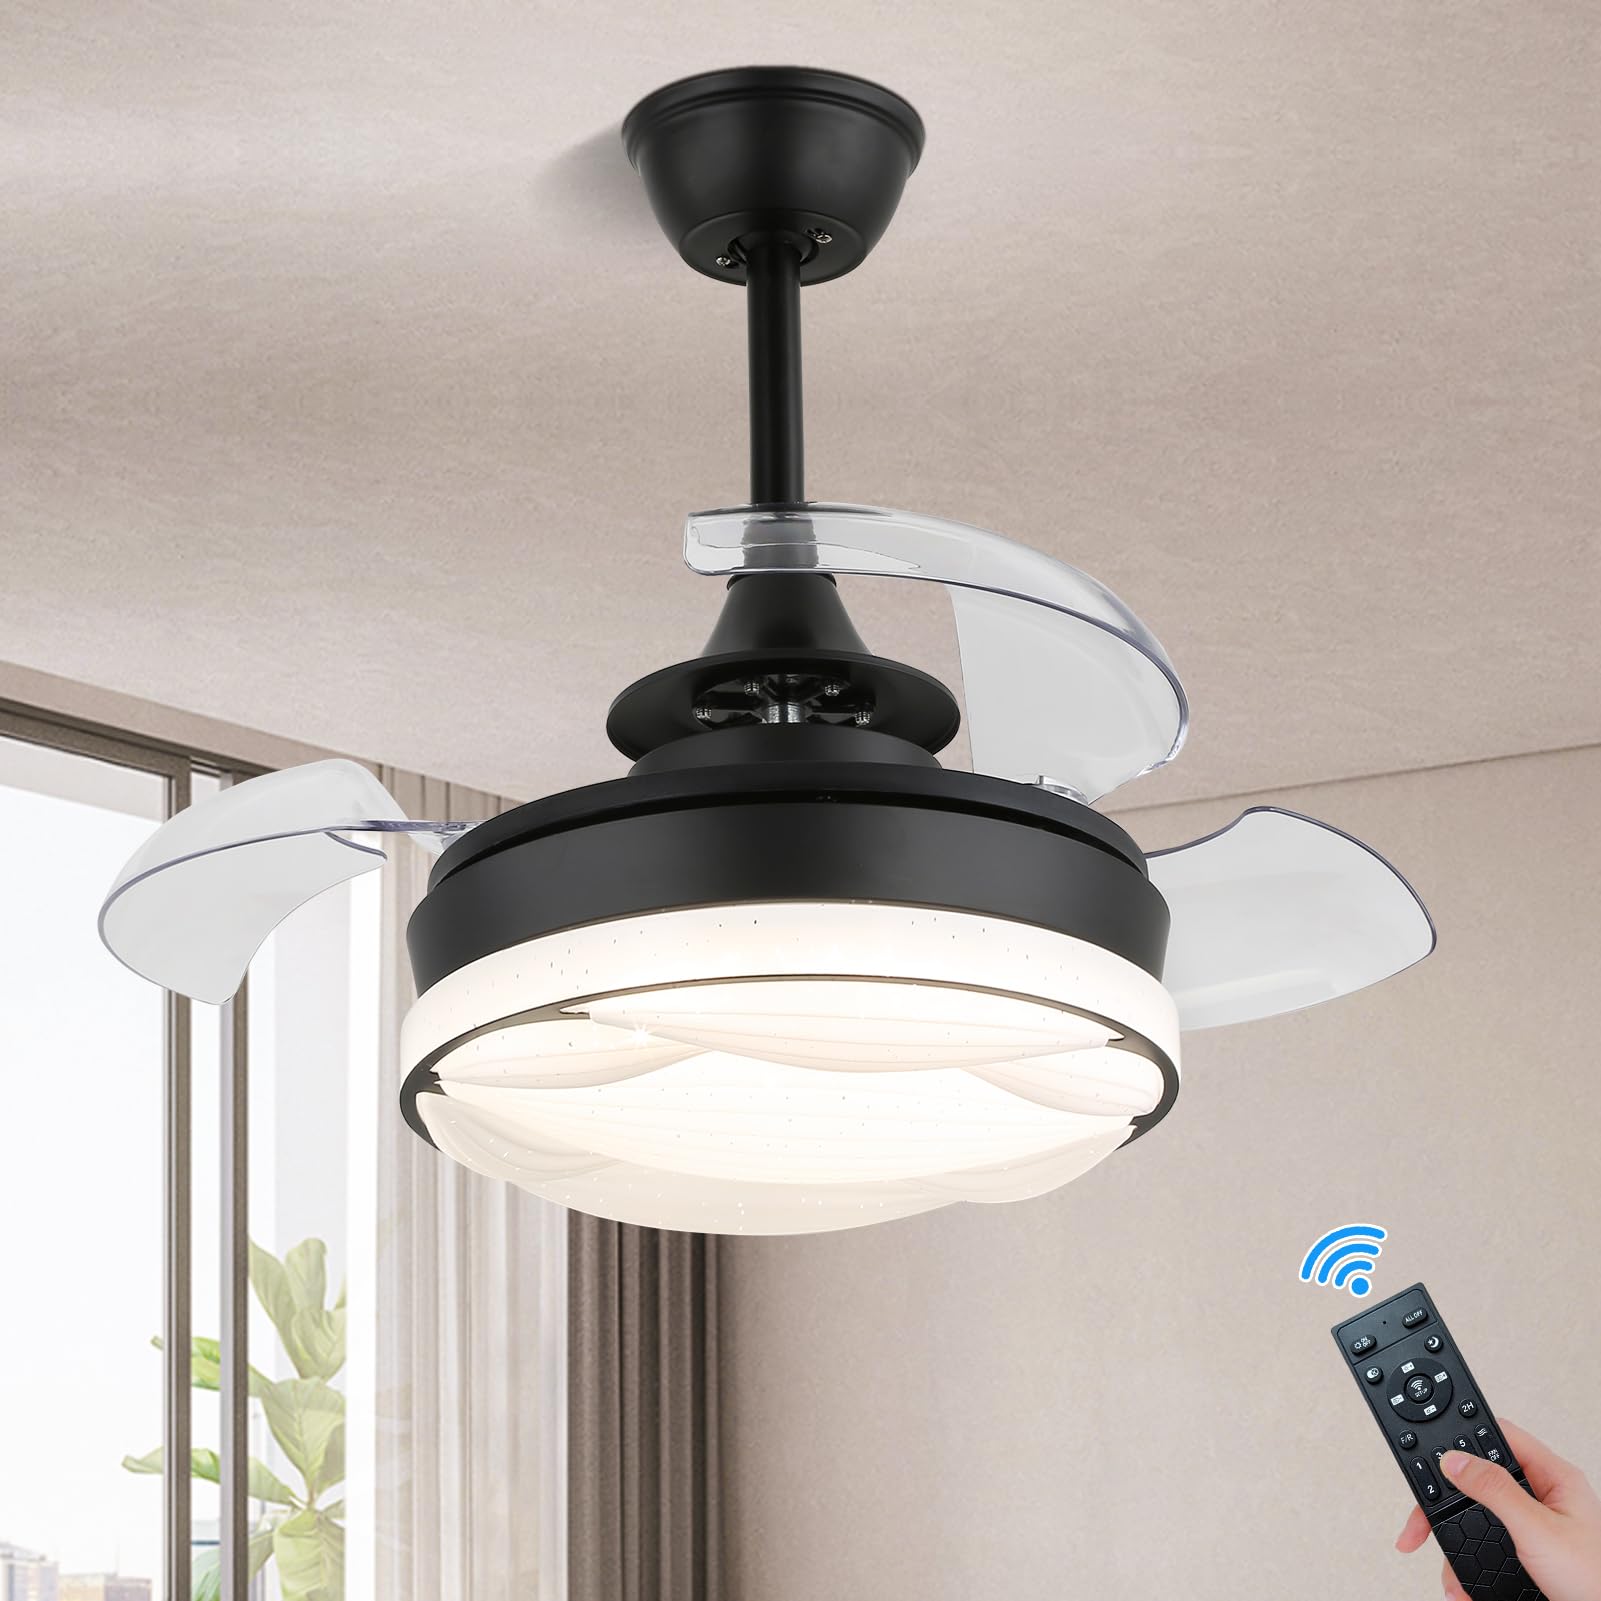 Finktonglan 22'' Small Ceiling Fans, Dimmable Semi Flush Mount Ceiling Fans with Lights and Remote, LED Fandelier Retractable Blades, Chandelier Ceiling Fans for Small Spaces, Kid Rooms (Black)